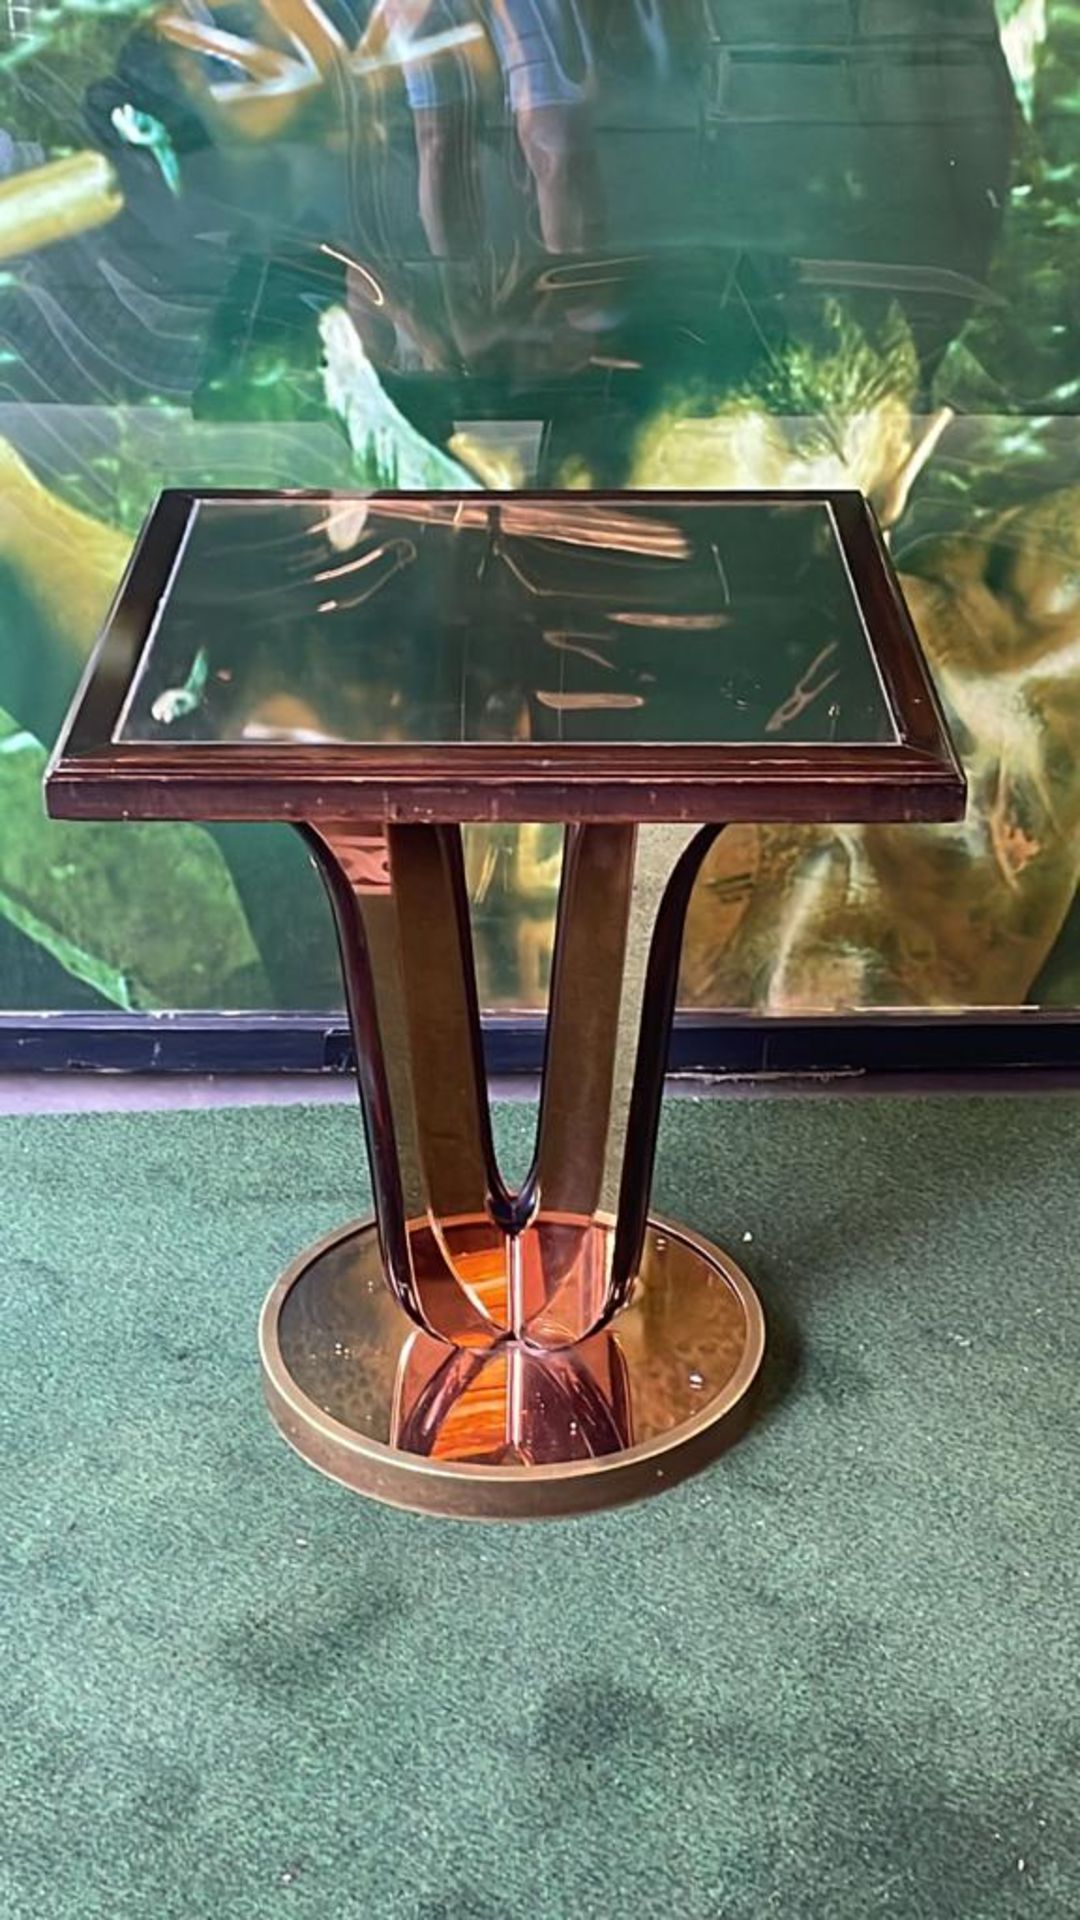 A square bar pedestal table with antiqued mirror plate accents 60 x 60 x 70cm - Image 2 of 2